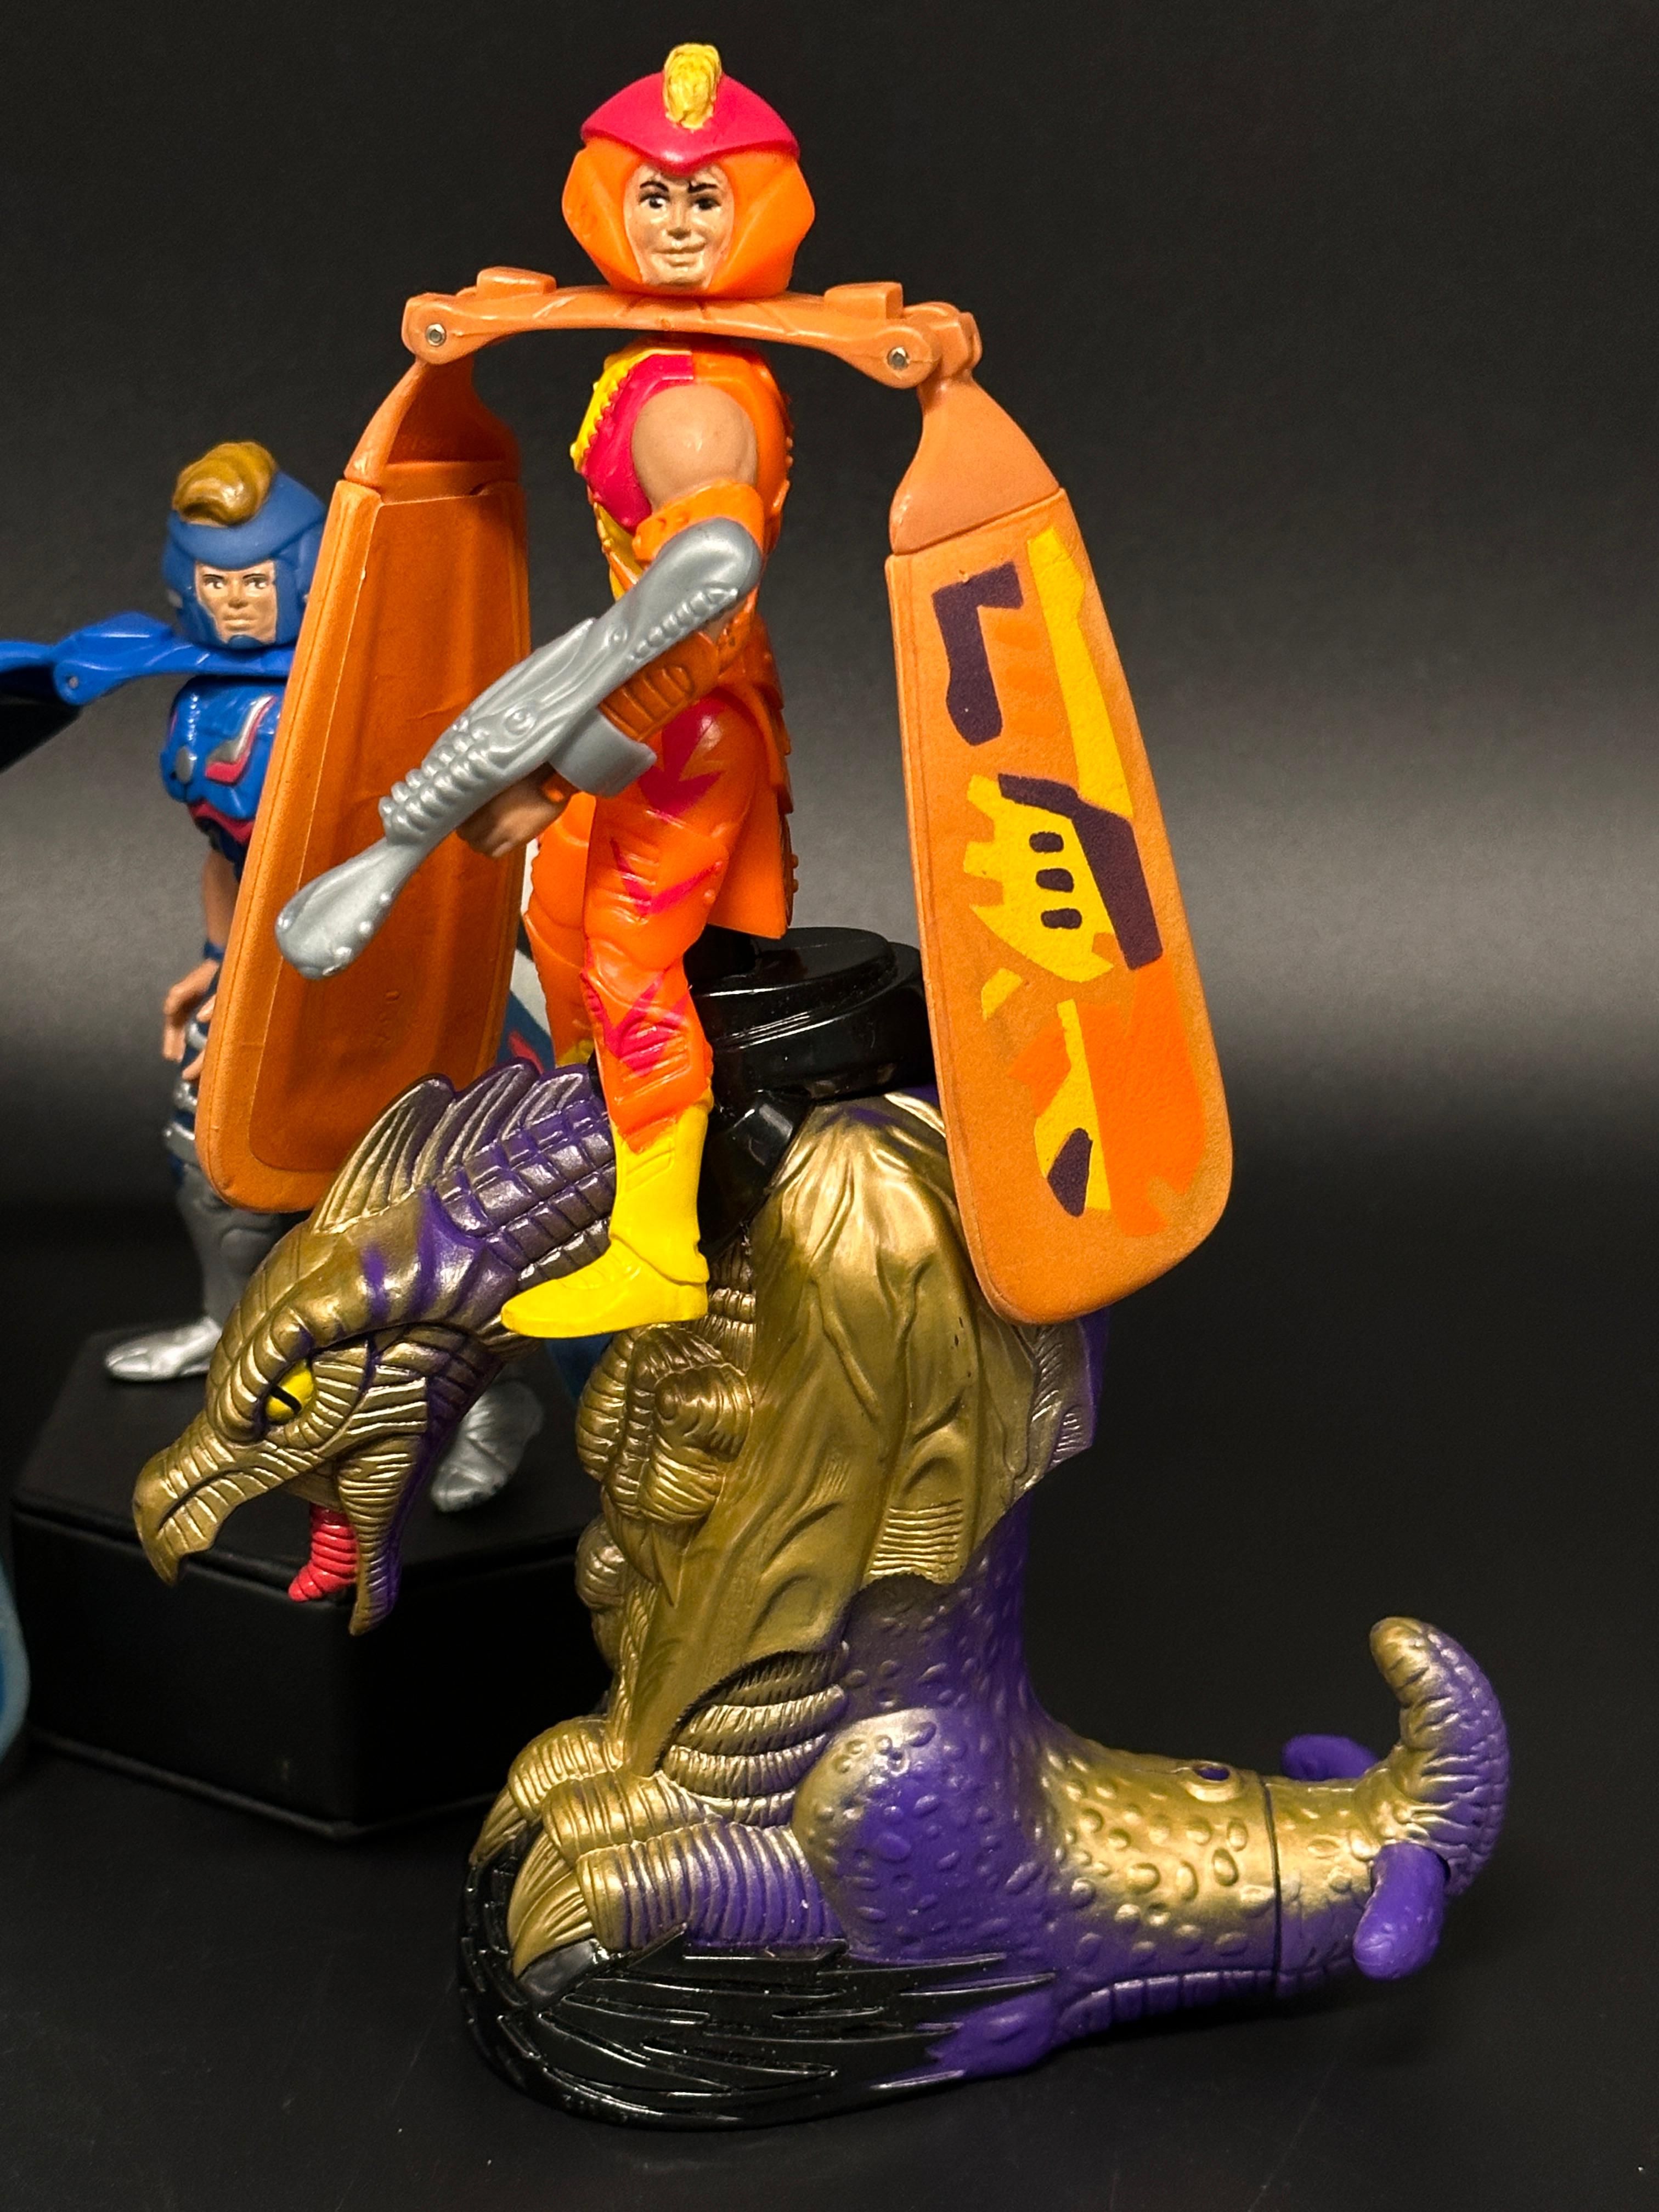 Misc. Dragon Flyz Action Figures and Dragon Launchers